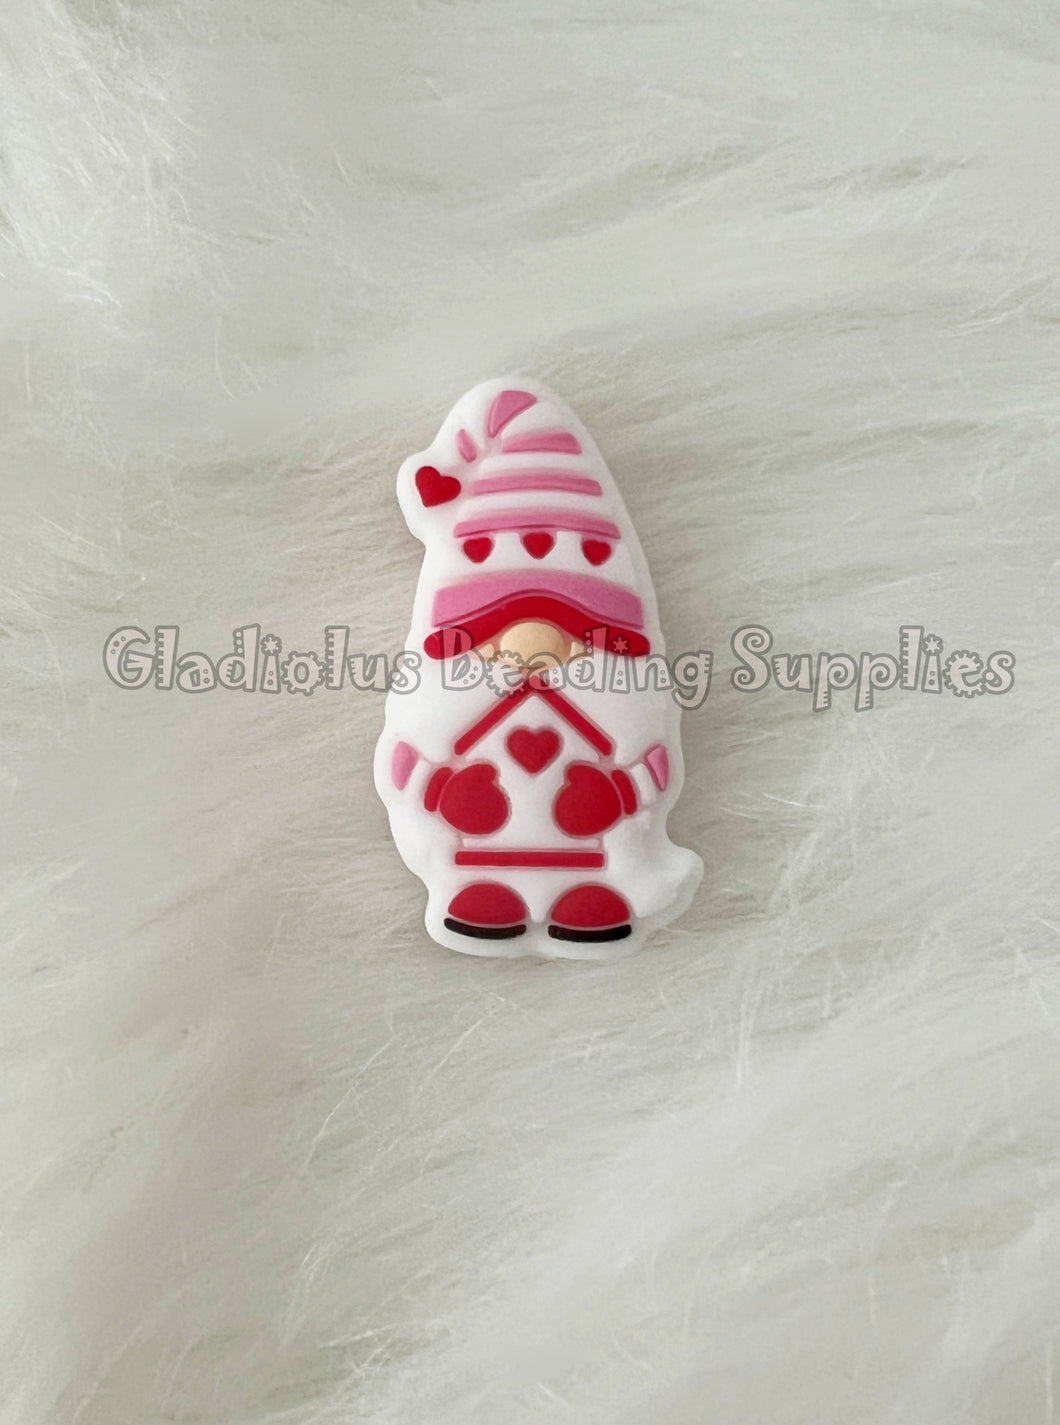 1 Pc 19mm*27mm - Gnome Focal Beads - Silicone Beads - Focal Beads